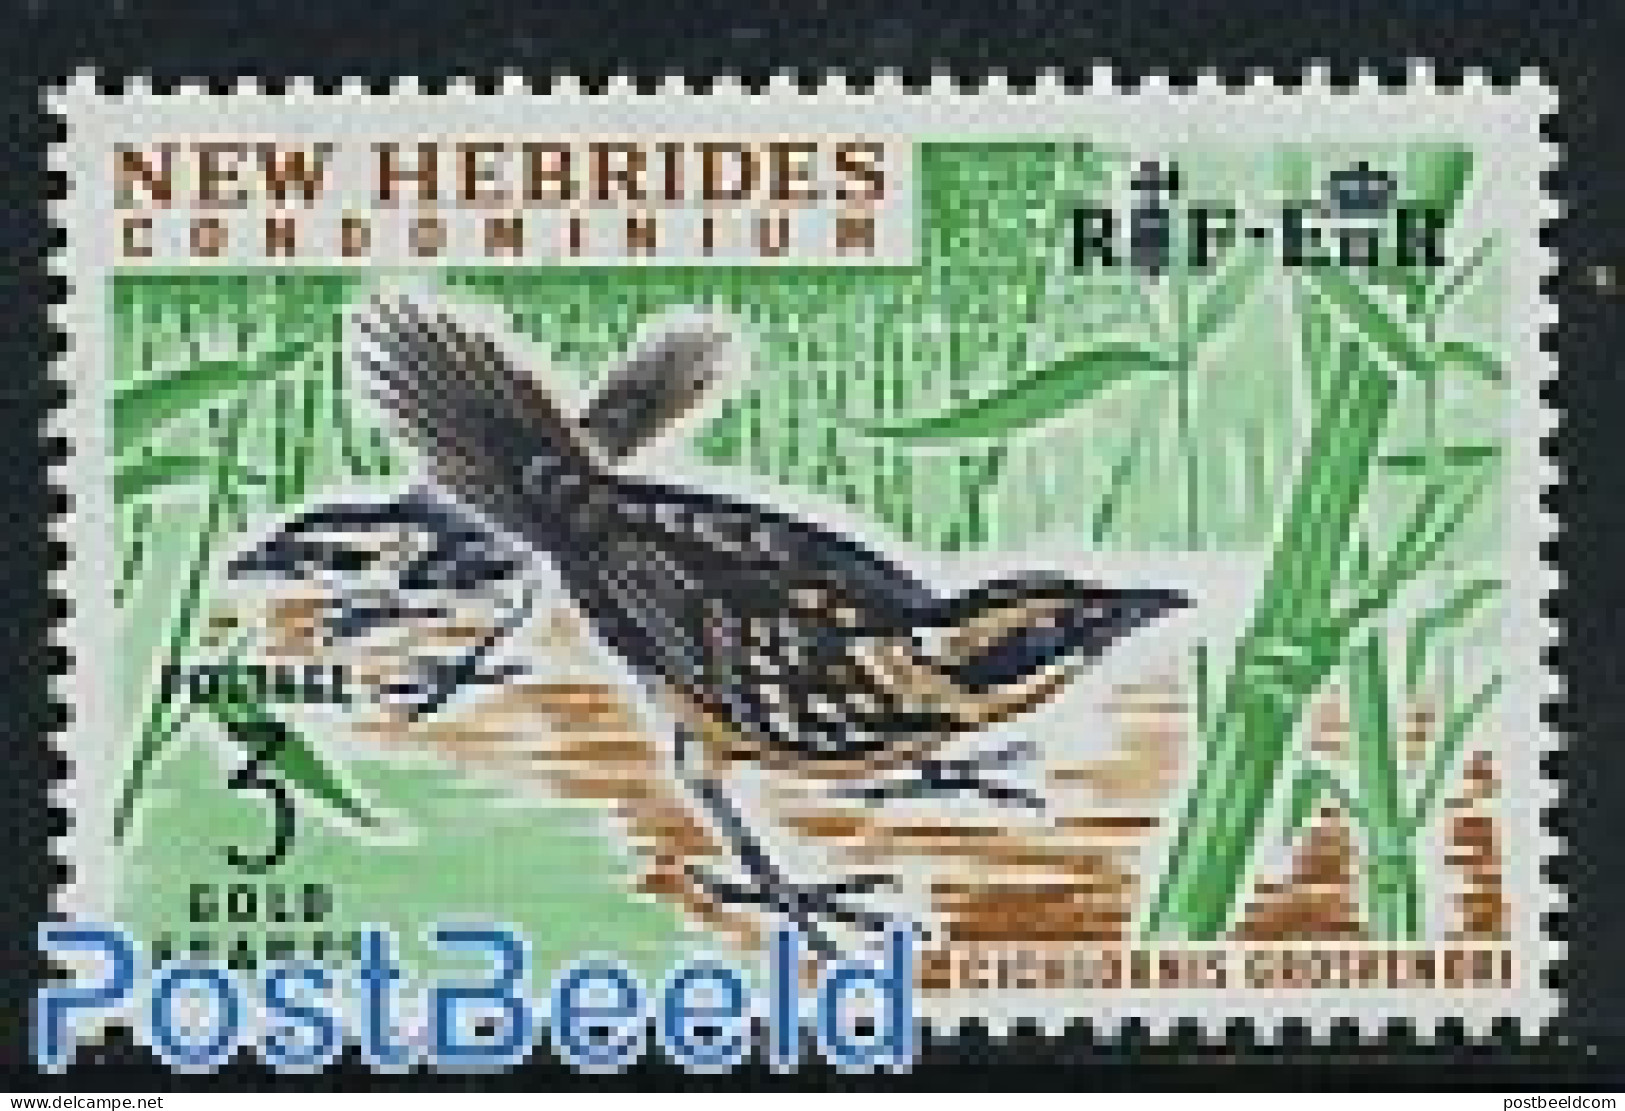 New Hebrides 1965 3F, Stamp Out Of Set, Mint NH, Nature - Birds - Nuovi